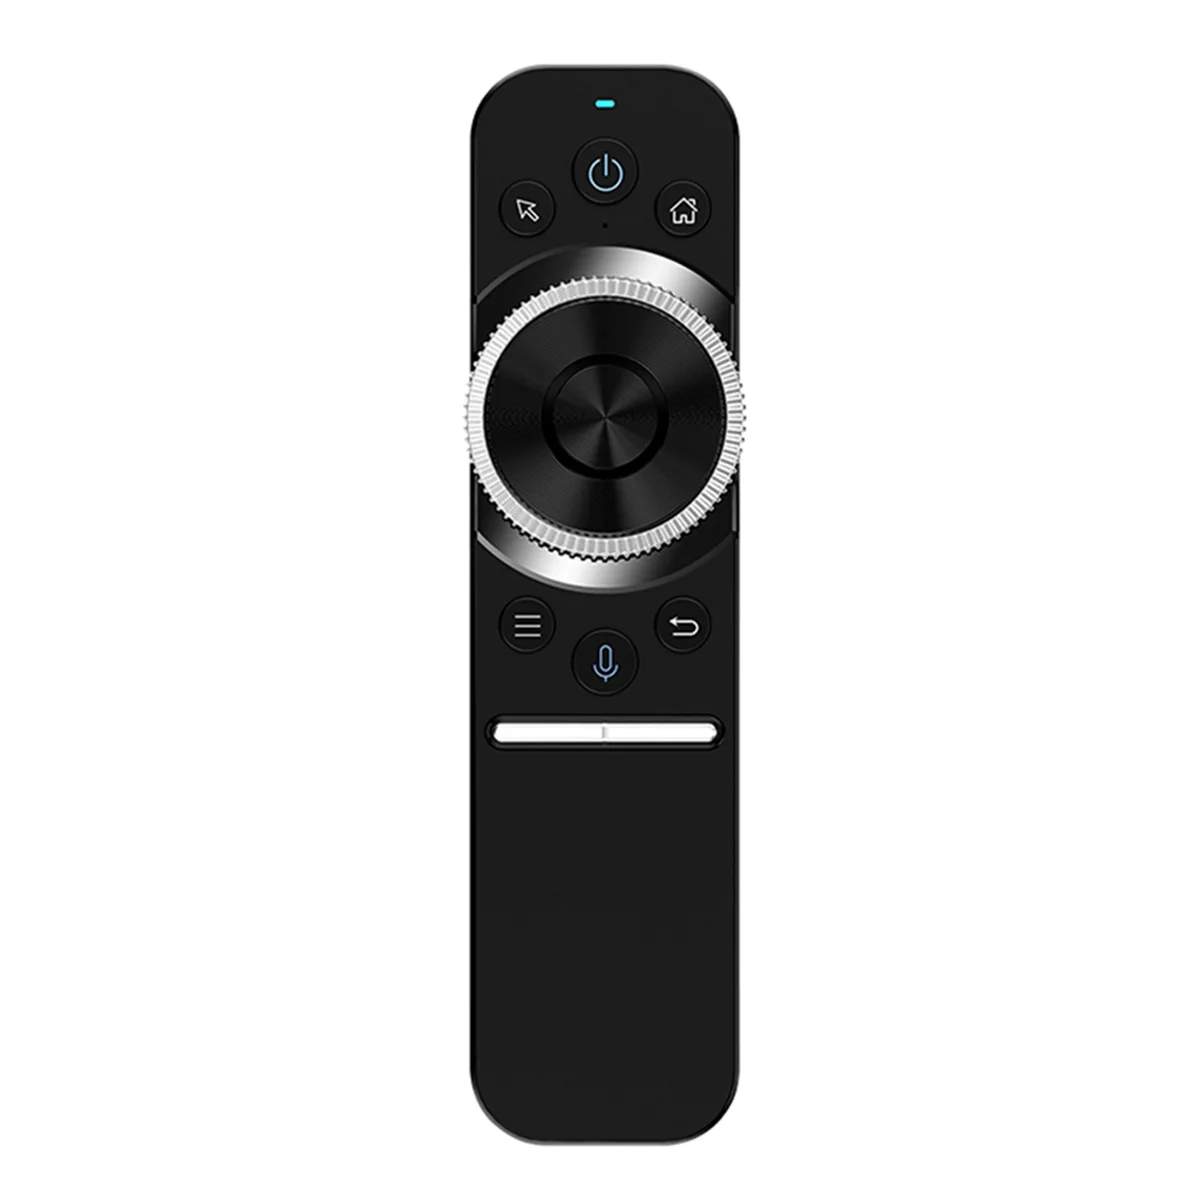 

W1S Air Mouse 2.4G Wireless Voice Remote Control IR Learning Gyroscope for Android Window Linux OS for TV BOX PC Laptop